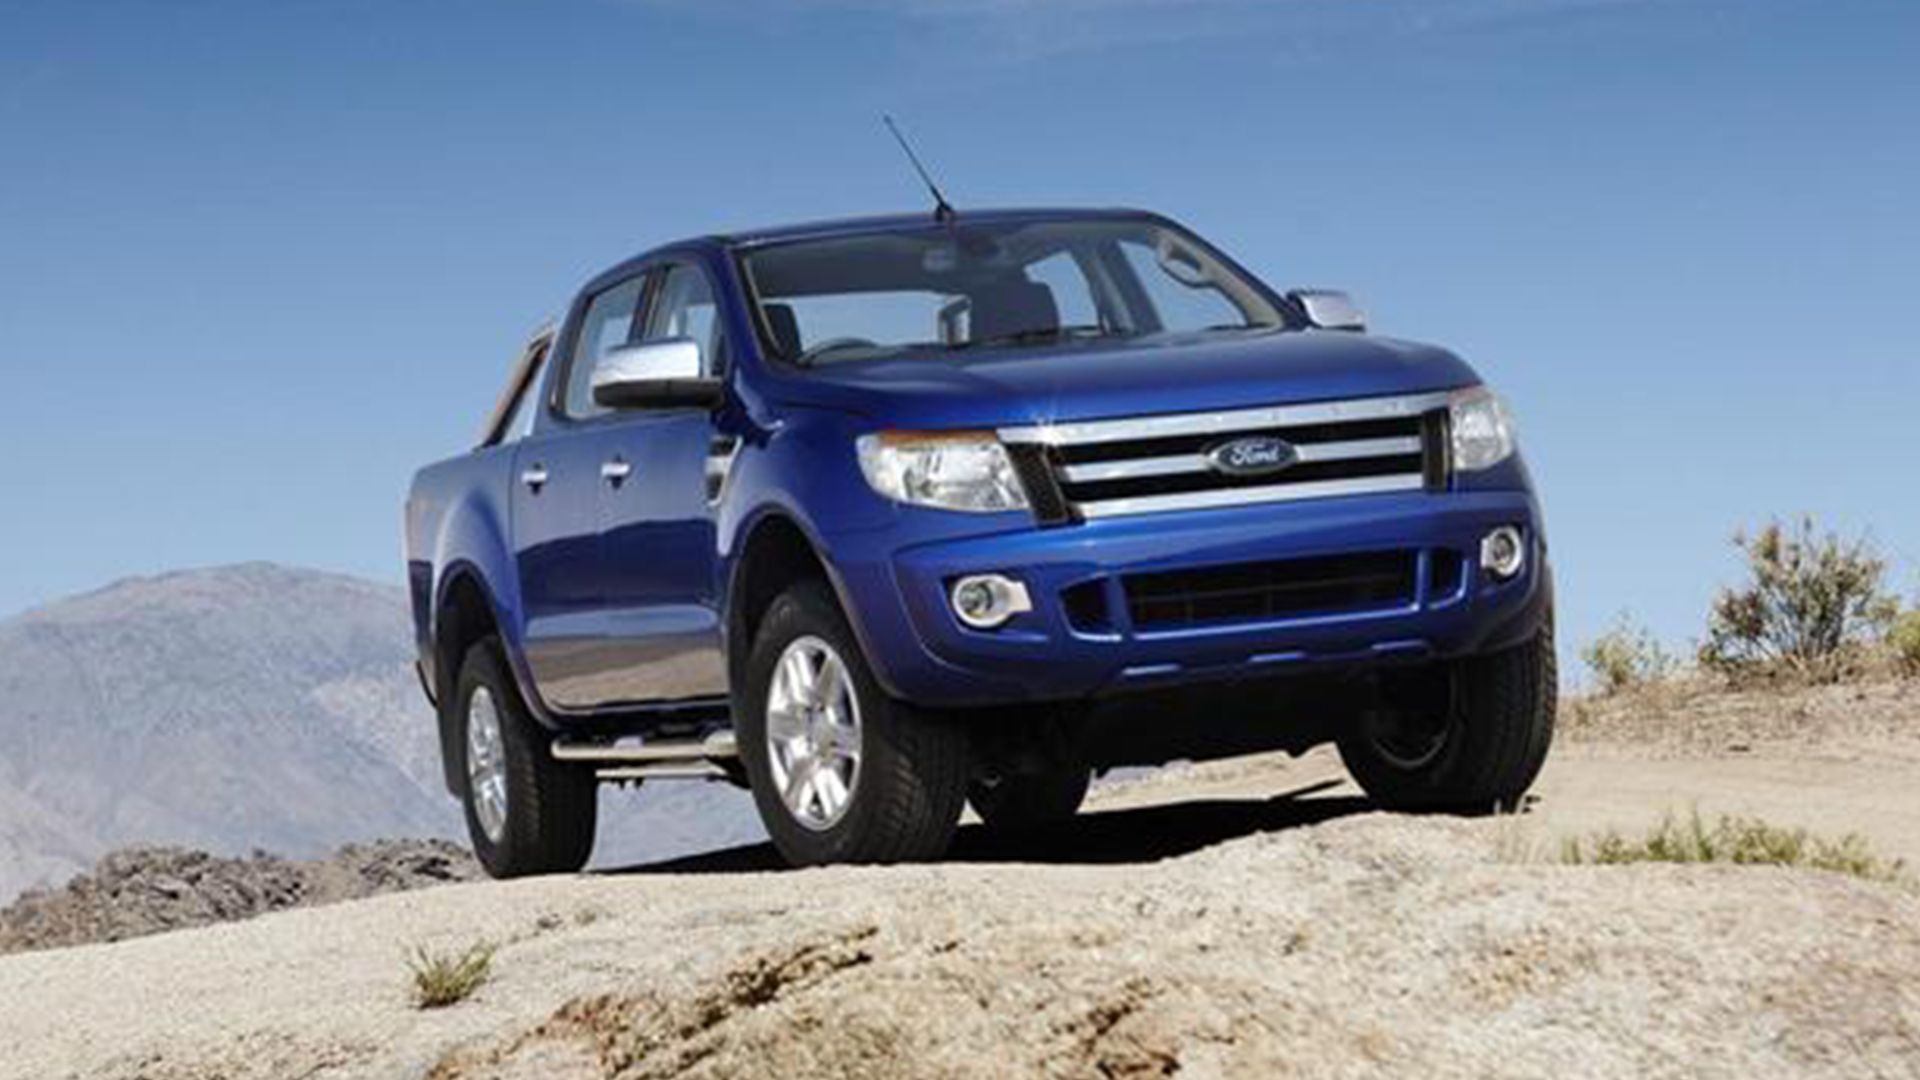 Exterior photo of the 2012 Ford Ranger